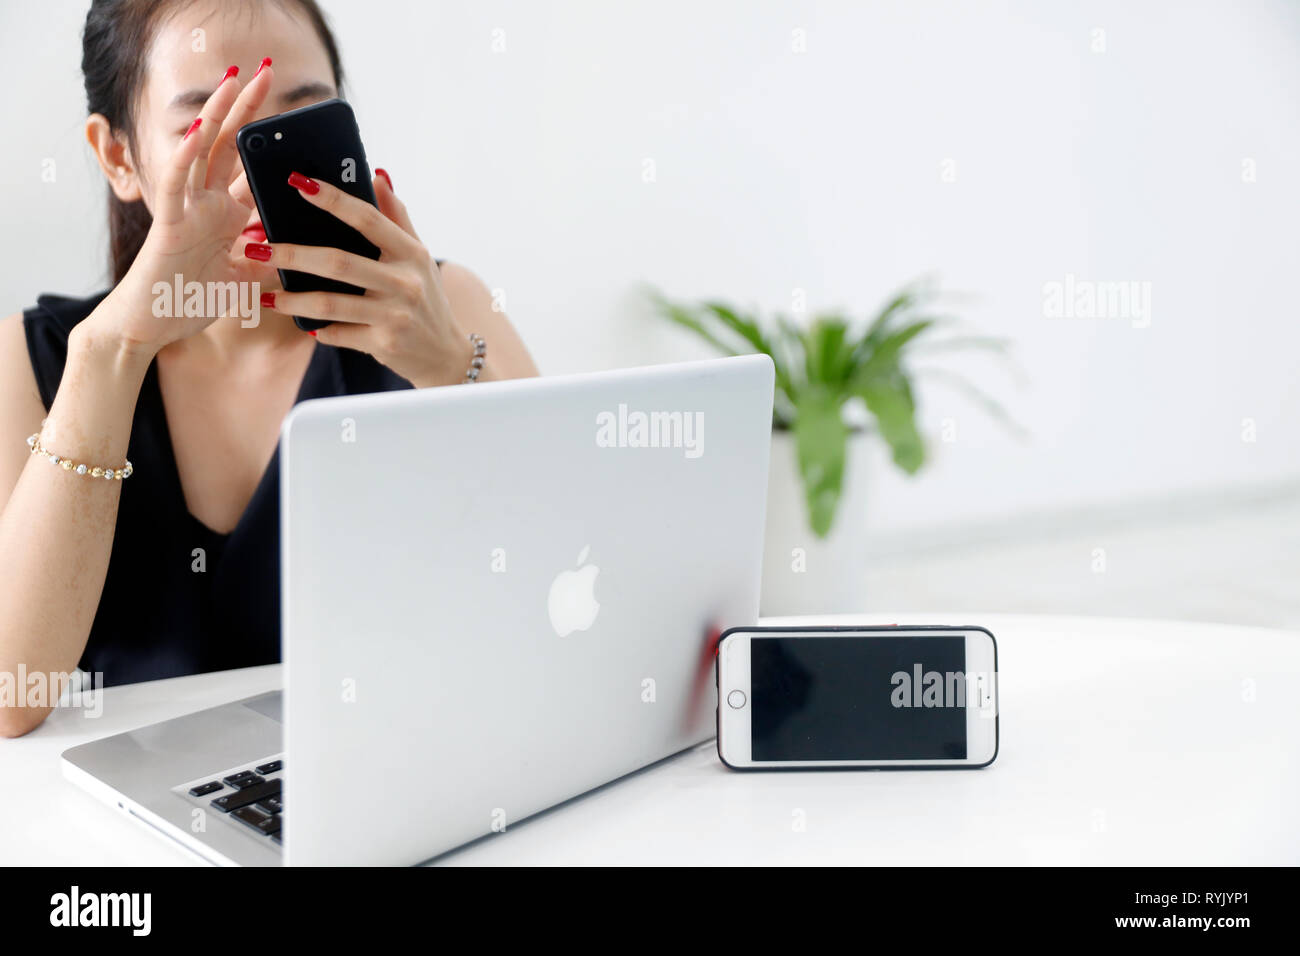 Woman with smartphone and laptop. Iphone and Mac Book.  Ho Chi Minh City. Vietnam. Stock Photo